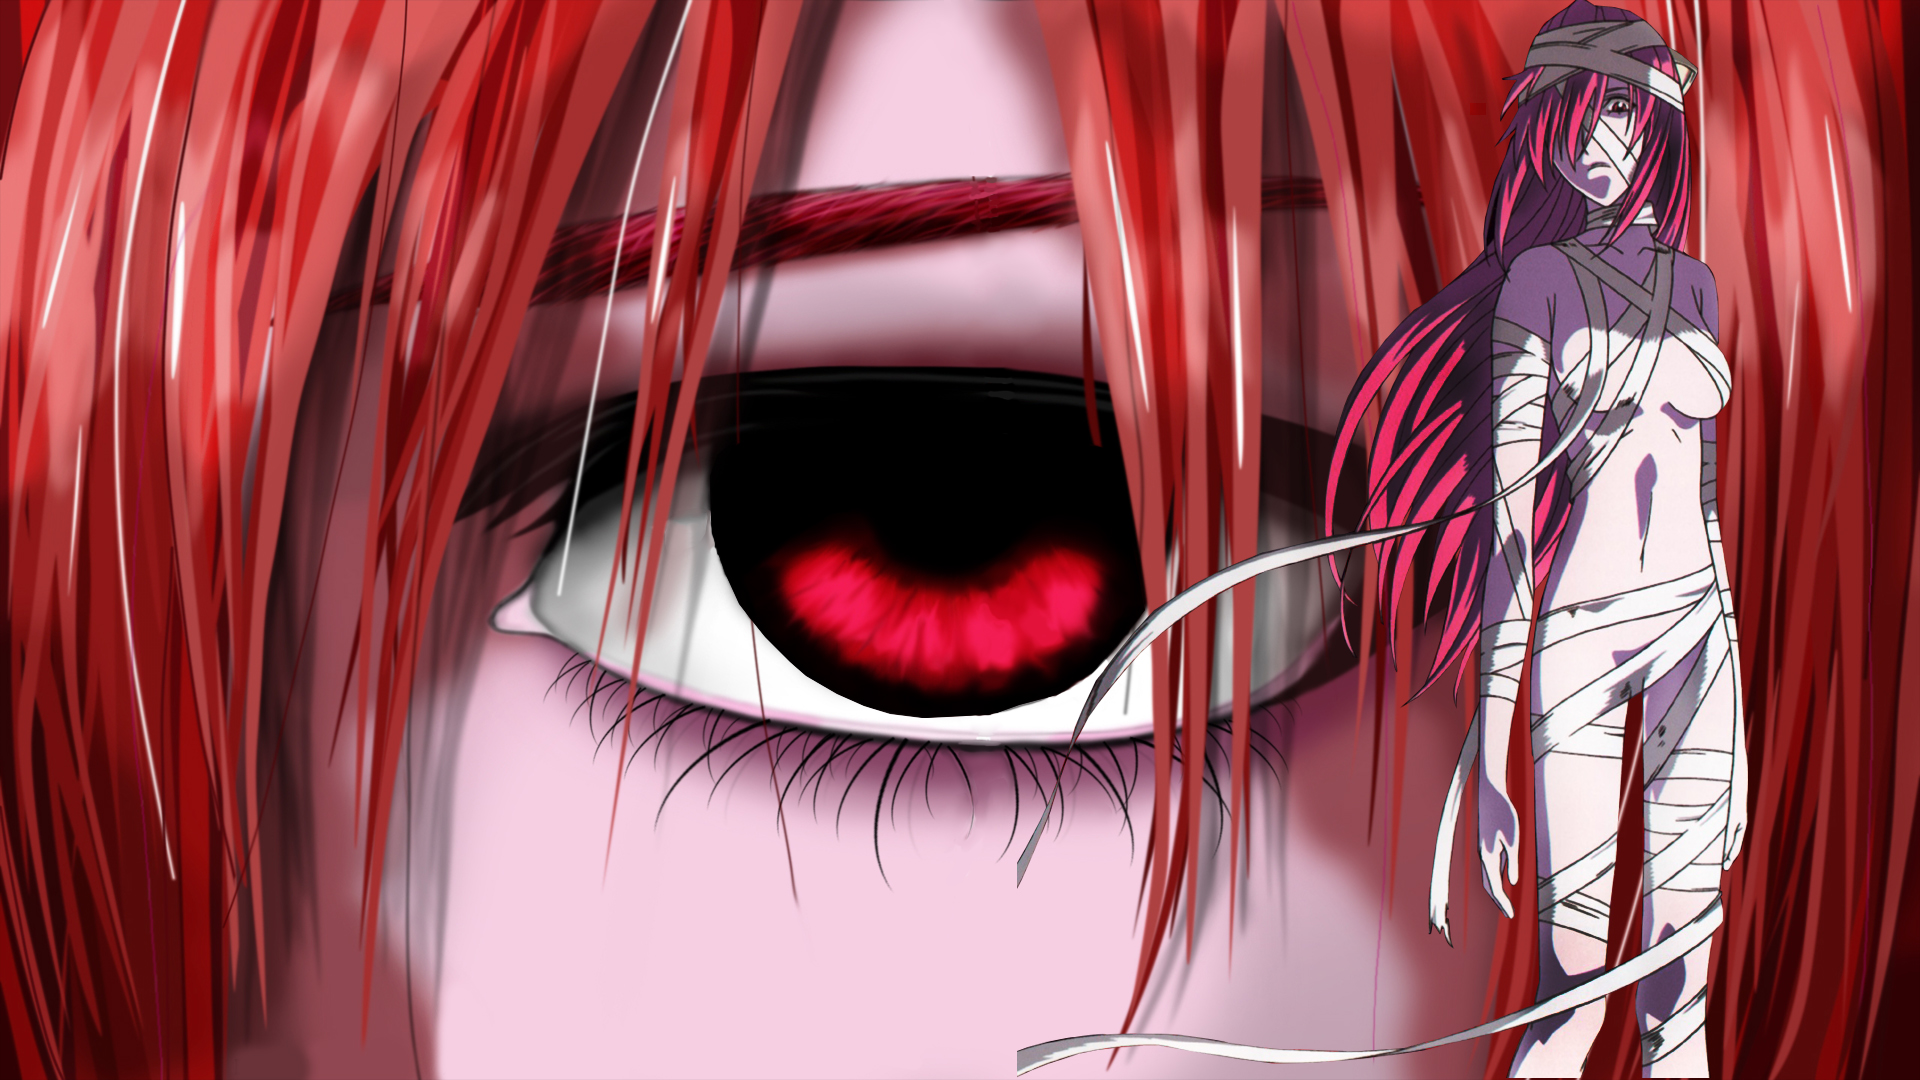 Wallpaper From The Anime Elfen Lied I Didn T Make These